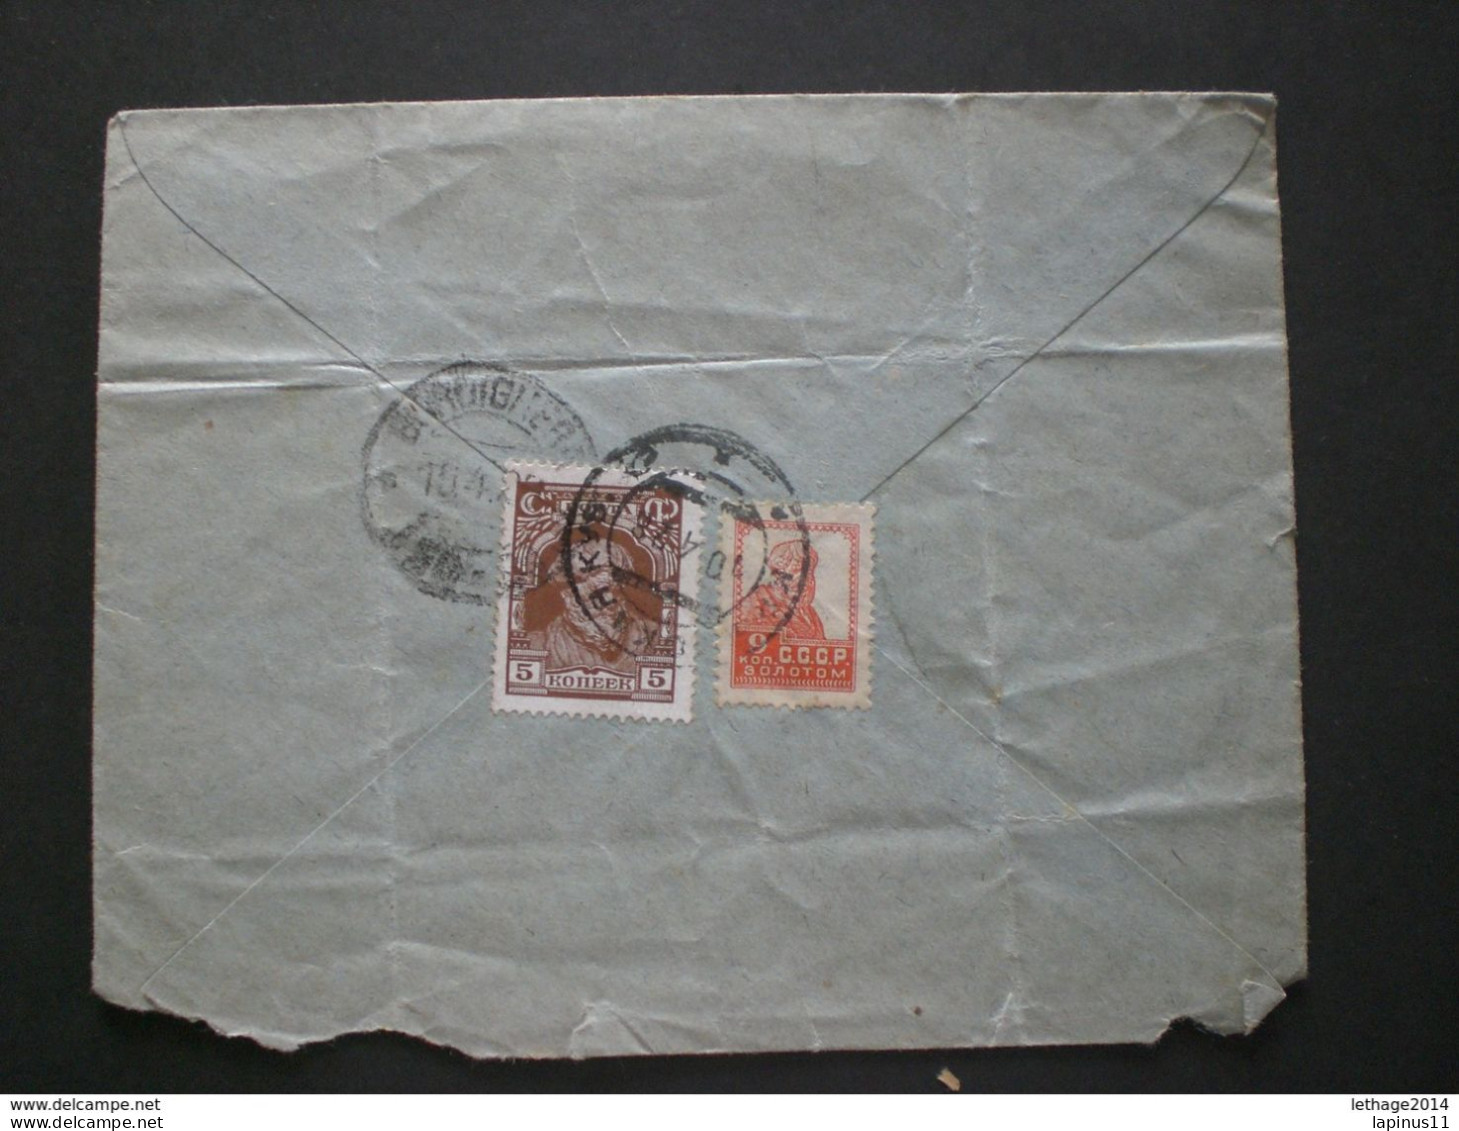 RUSSIA RUSSIE РОССИЯ STAMPS COVER 1928 RUSSLAND TO ITALY RRR RIF. TAGG (175) - Storia Postale